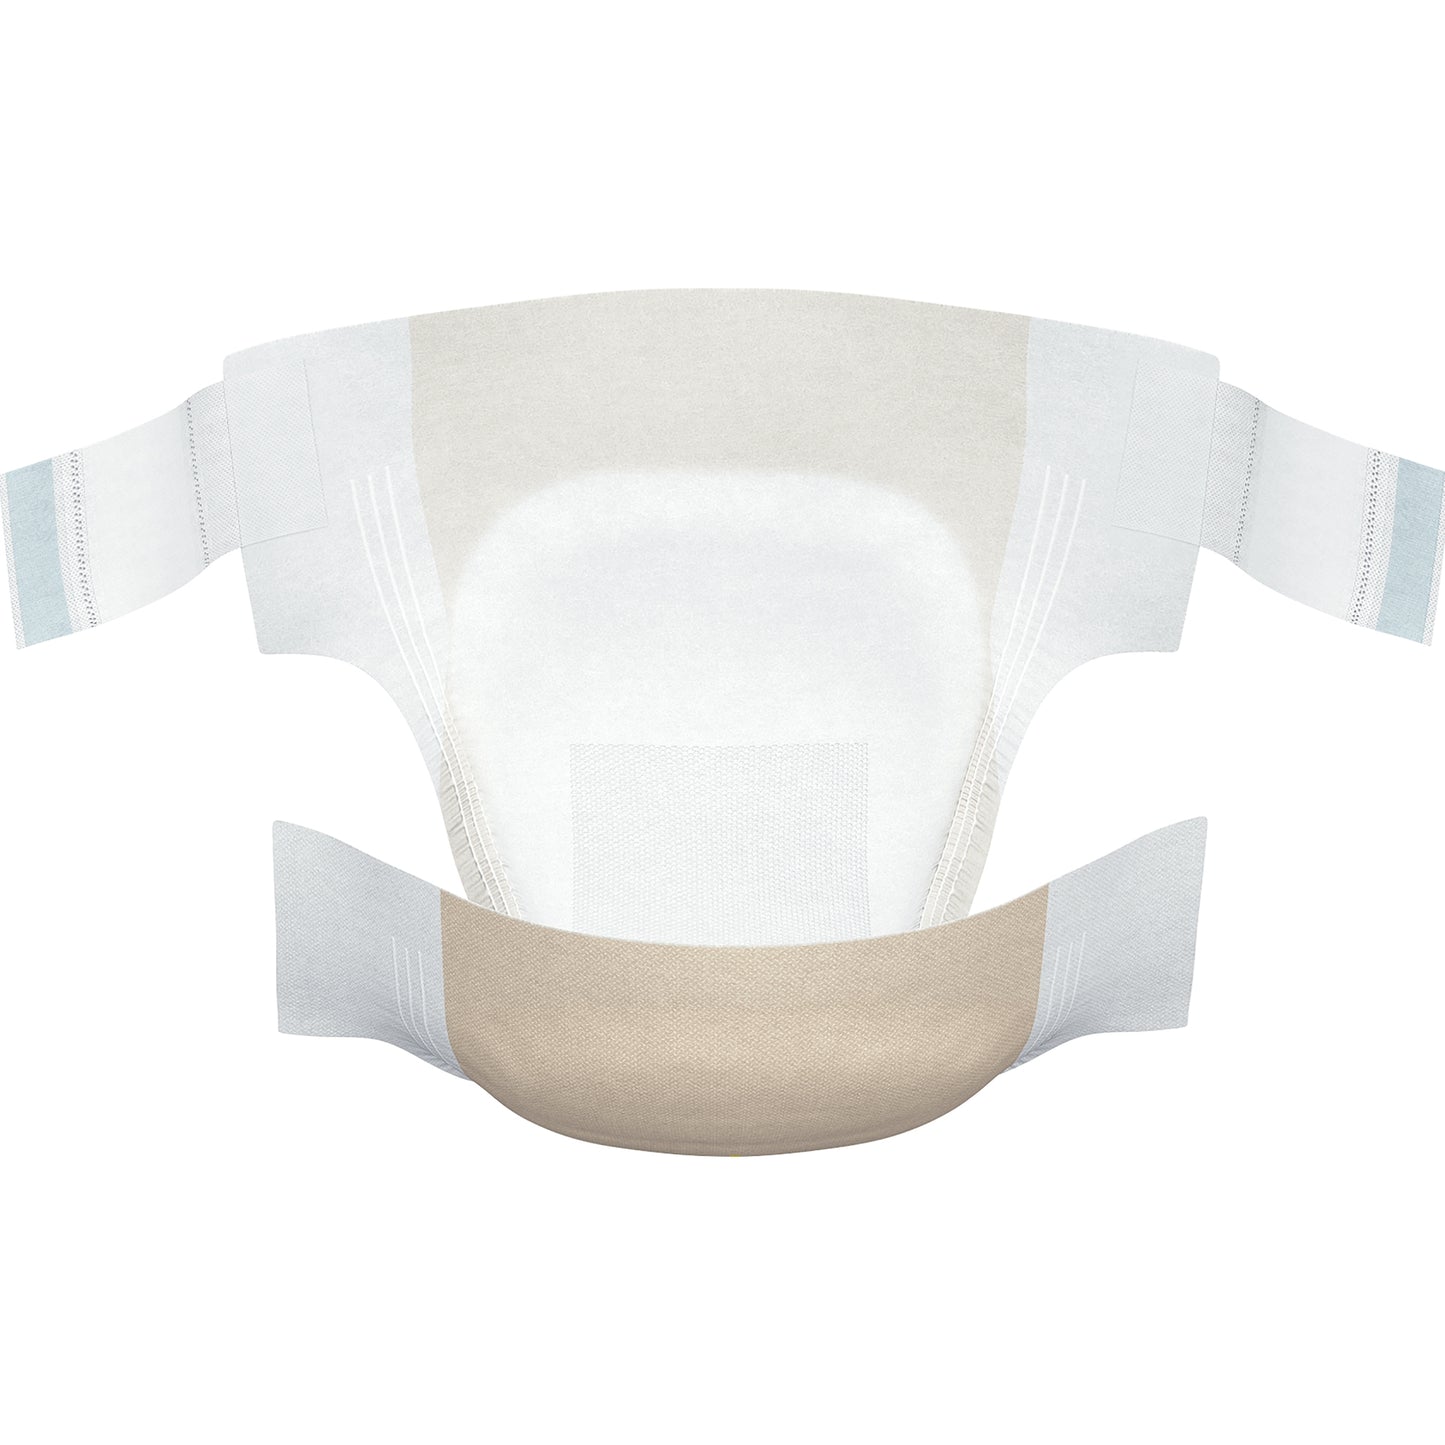 Tena Stretch Plus Incontinence Brief, Large / Extra Large - 67603